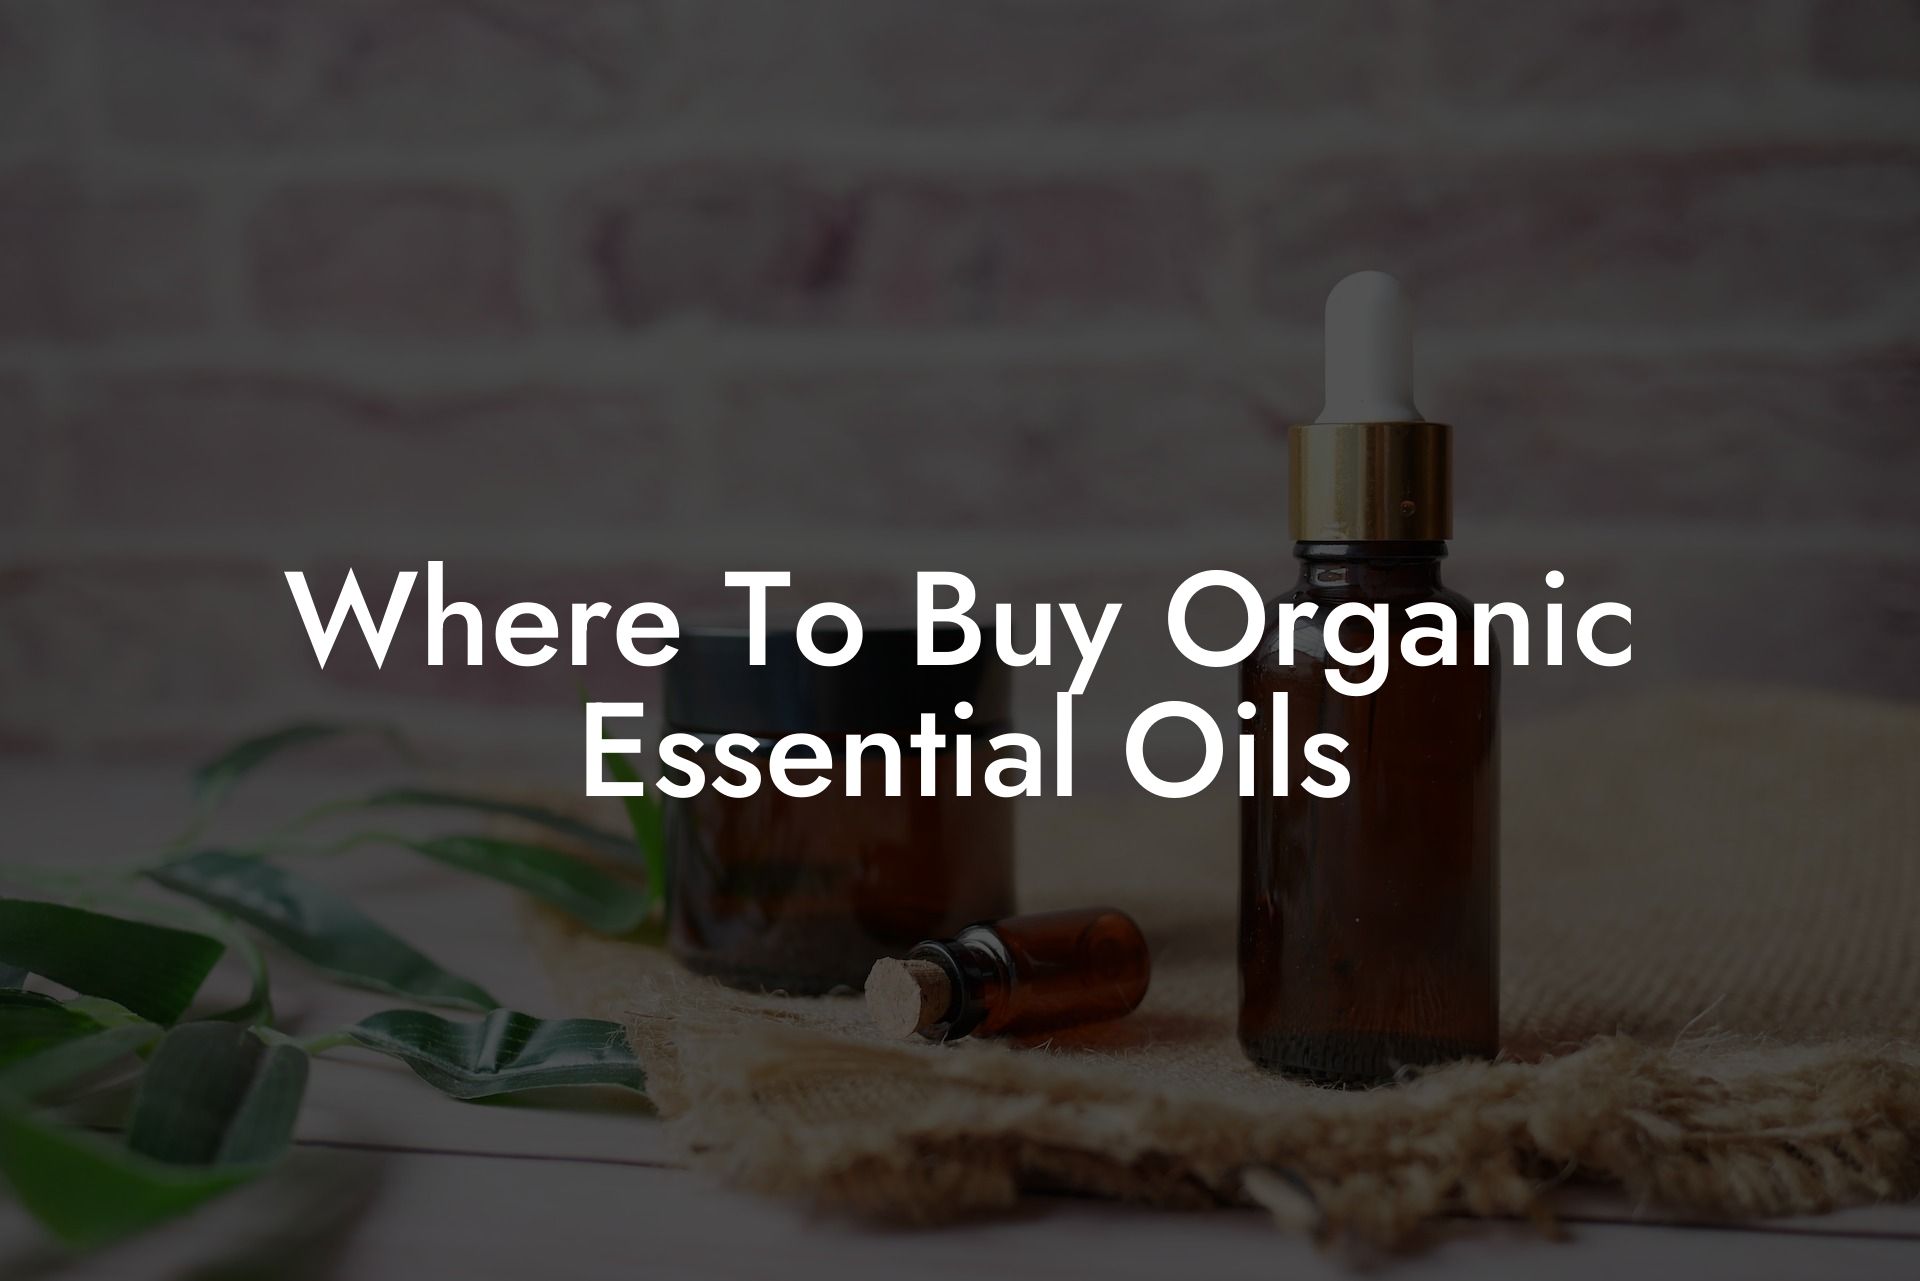 Where To Buy Organic Essential Oils